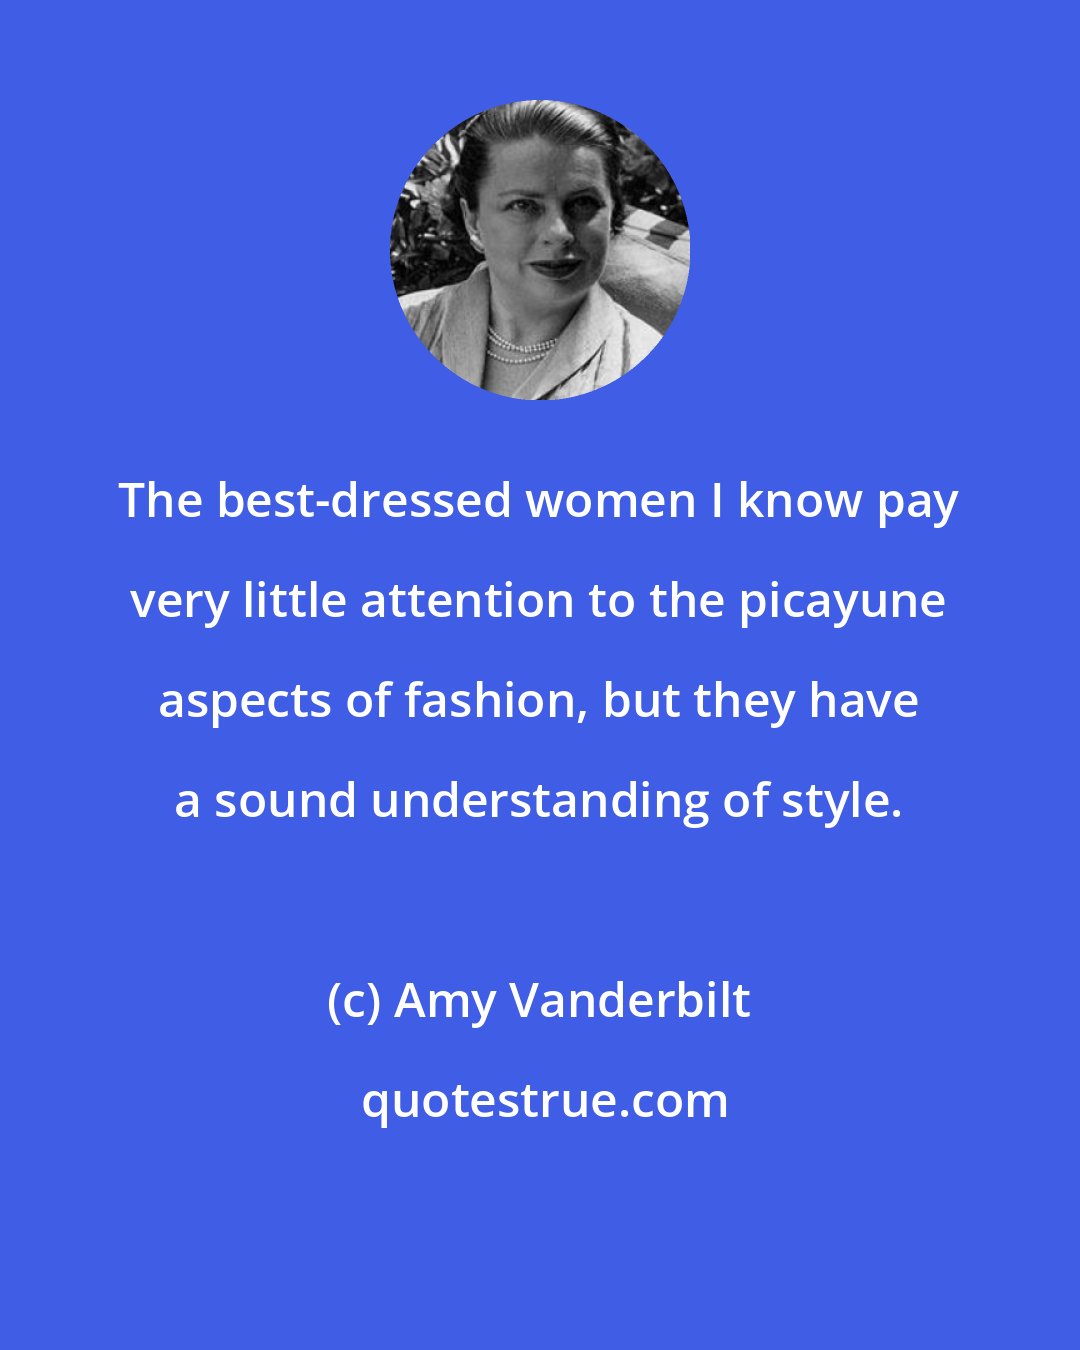 Amy Vanderbilt: The best-dressed women I know pay very little attention to the picayune aspects of fashion, but they have a sound understanding of style.